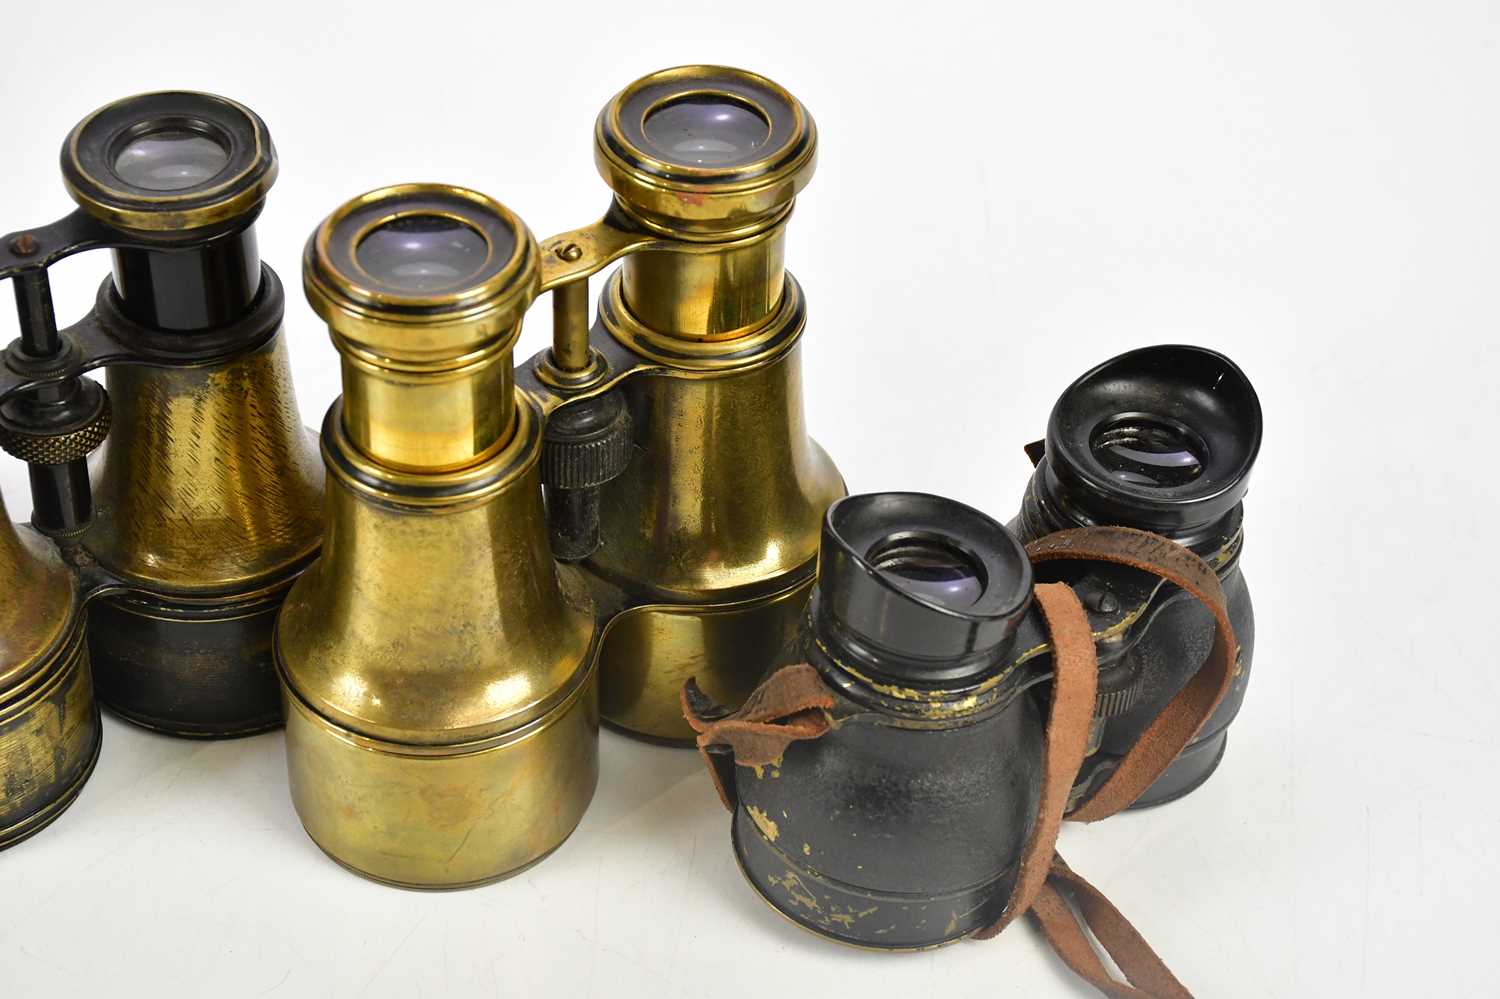 L PETIT FABT; a pair of early 20th century French brass binoculars, stamped ‘Mk V Wide’ and number - Bild 3 aus 5